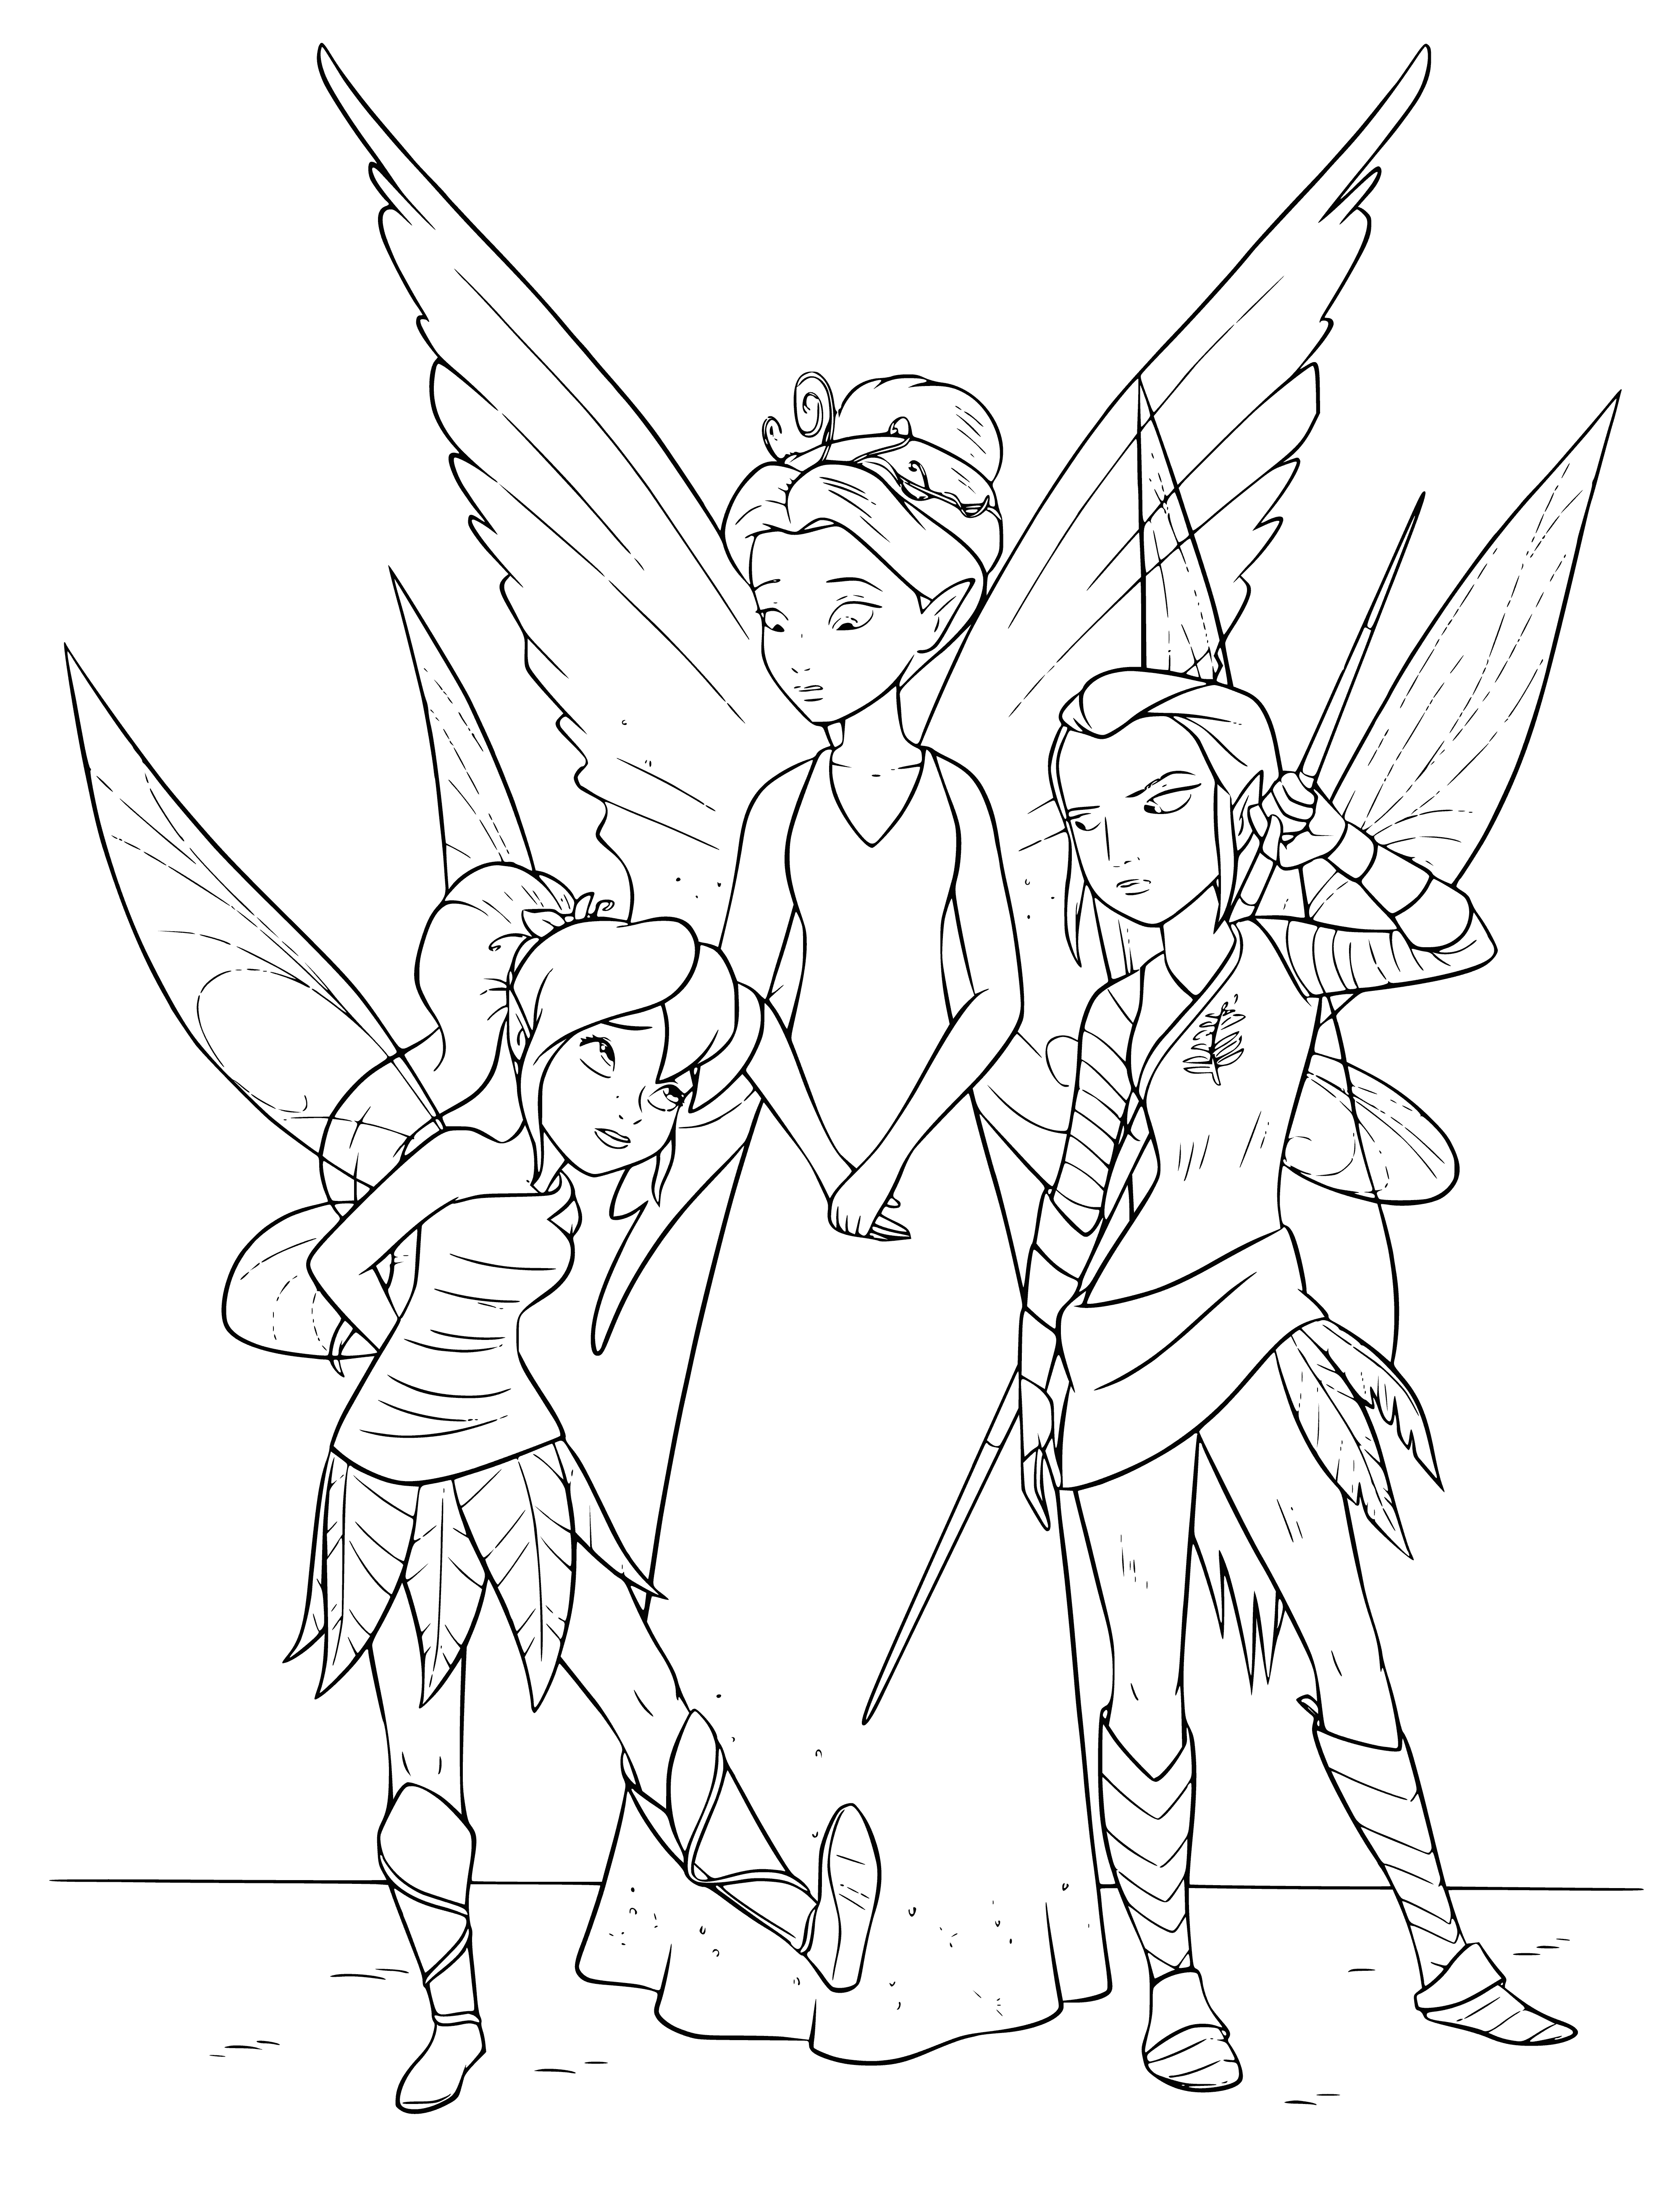 Nyx. Fauna and Queen Clarion coloring page